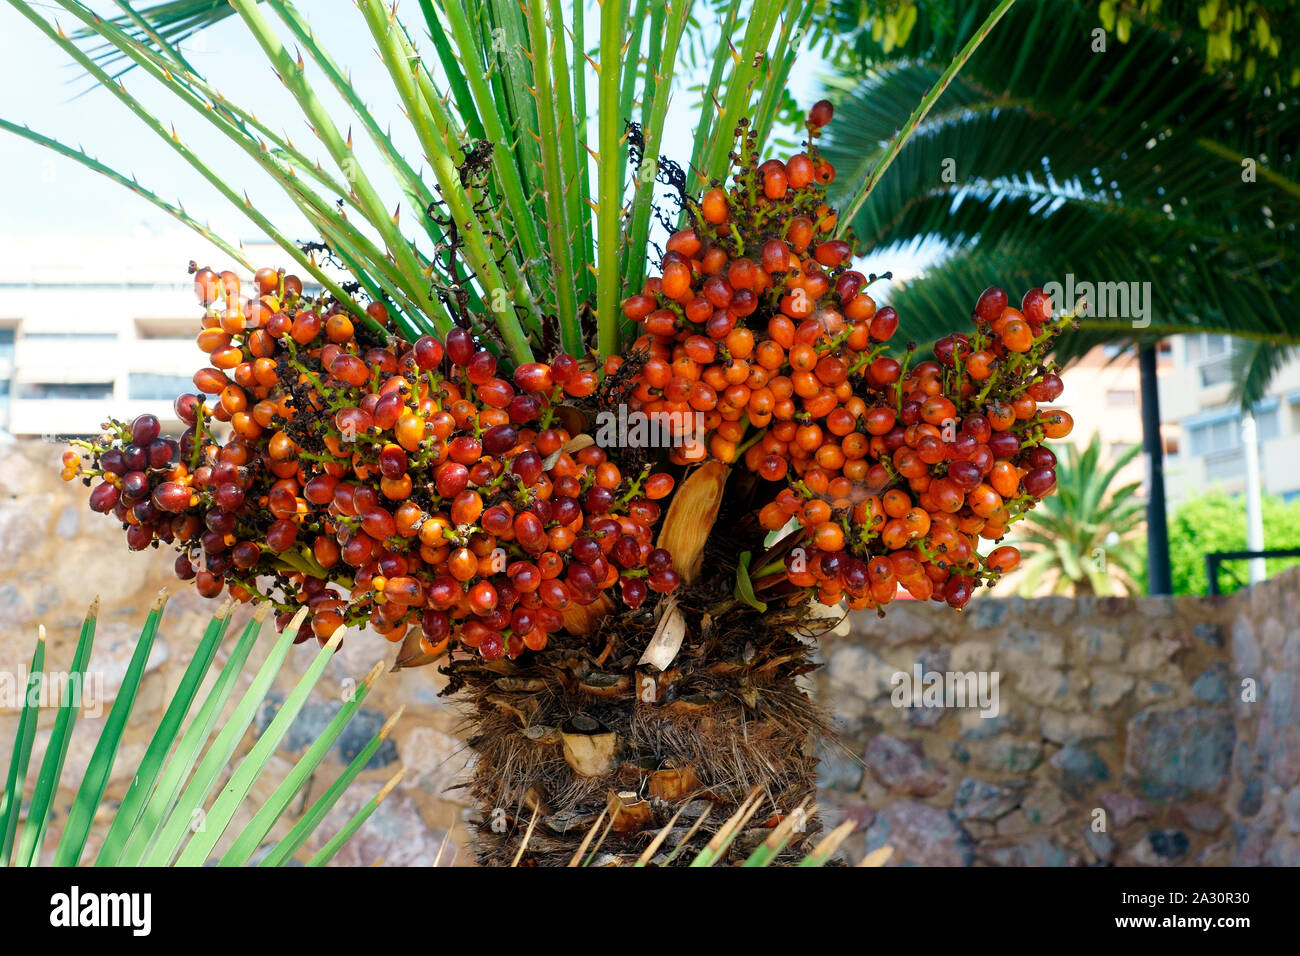 PALM TREE WITH DATES Stock Photo